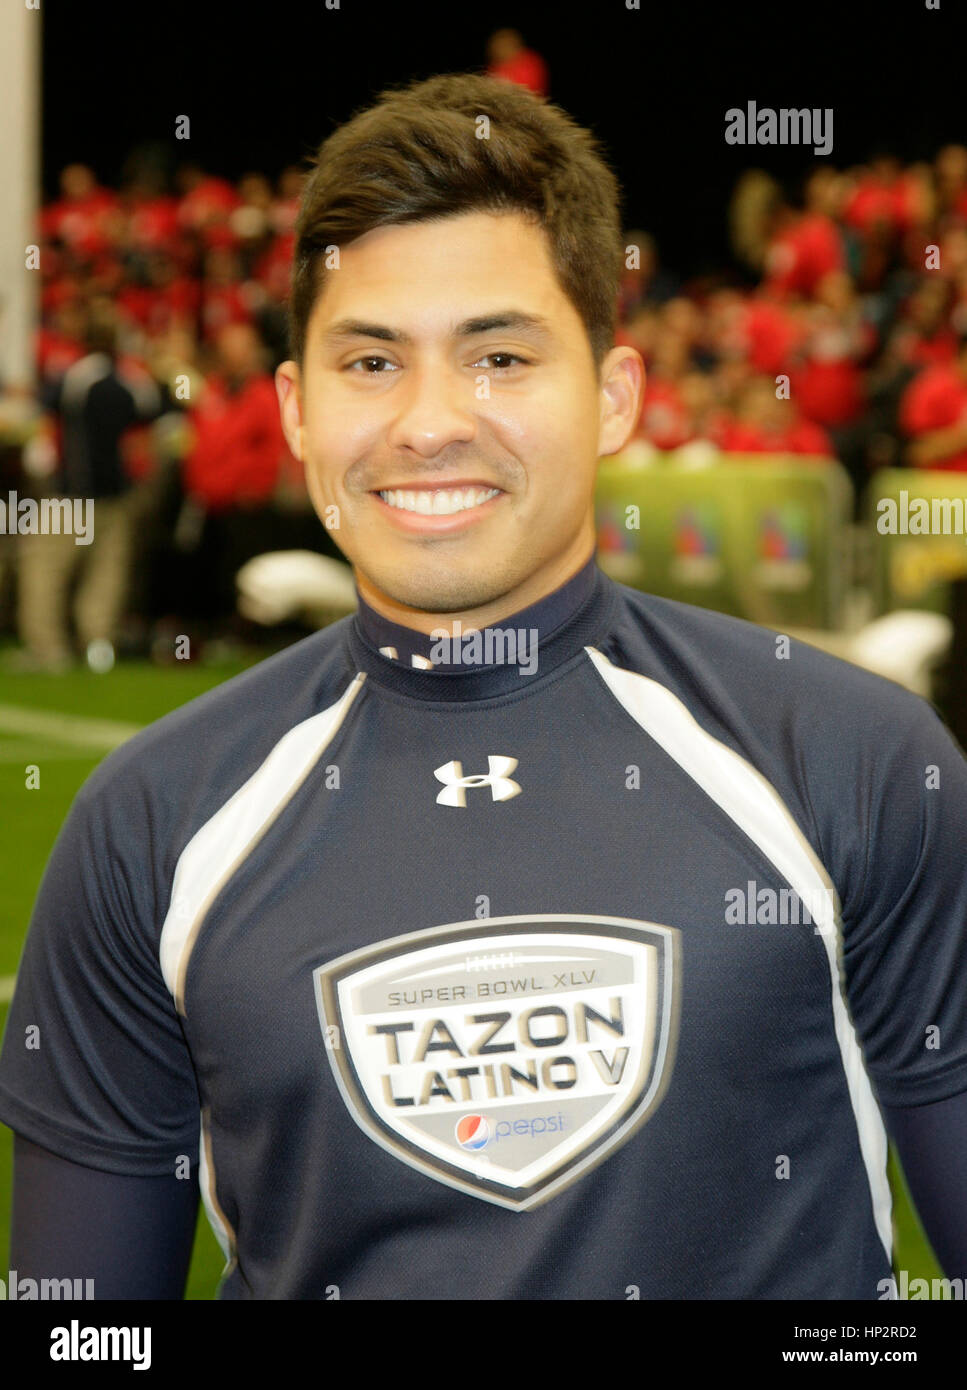 Carlos Santos at the Tazon Latino V flag football game at Super Bowl NFL Experience at the Dallas Convention Center on February 2, 2011 in Dallas, Texas. Photo by Francis Specker Stock Photo